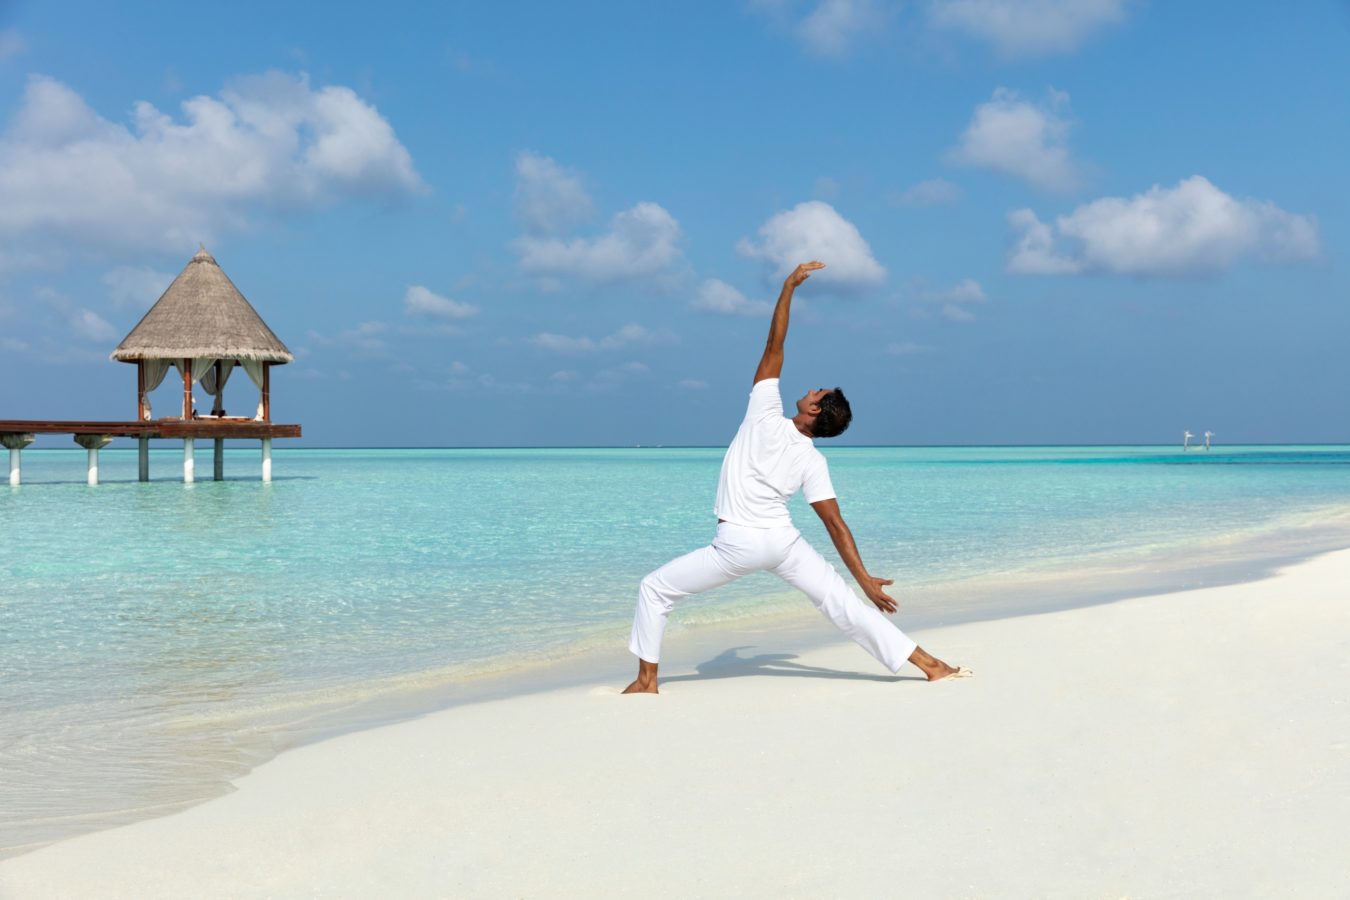 Review - Wellness in Paradise - We Test the Tailored Wellbeing Offerings at Anantara Maldives